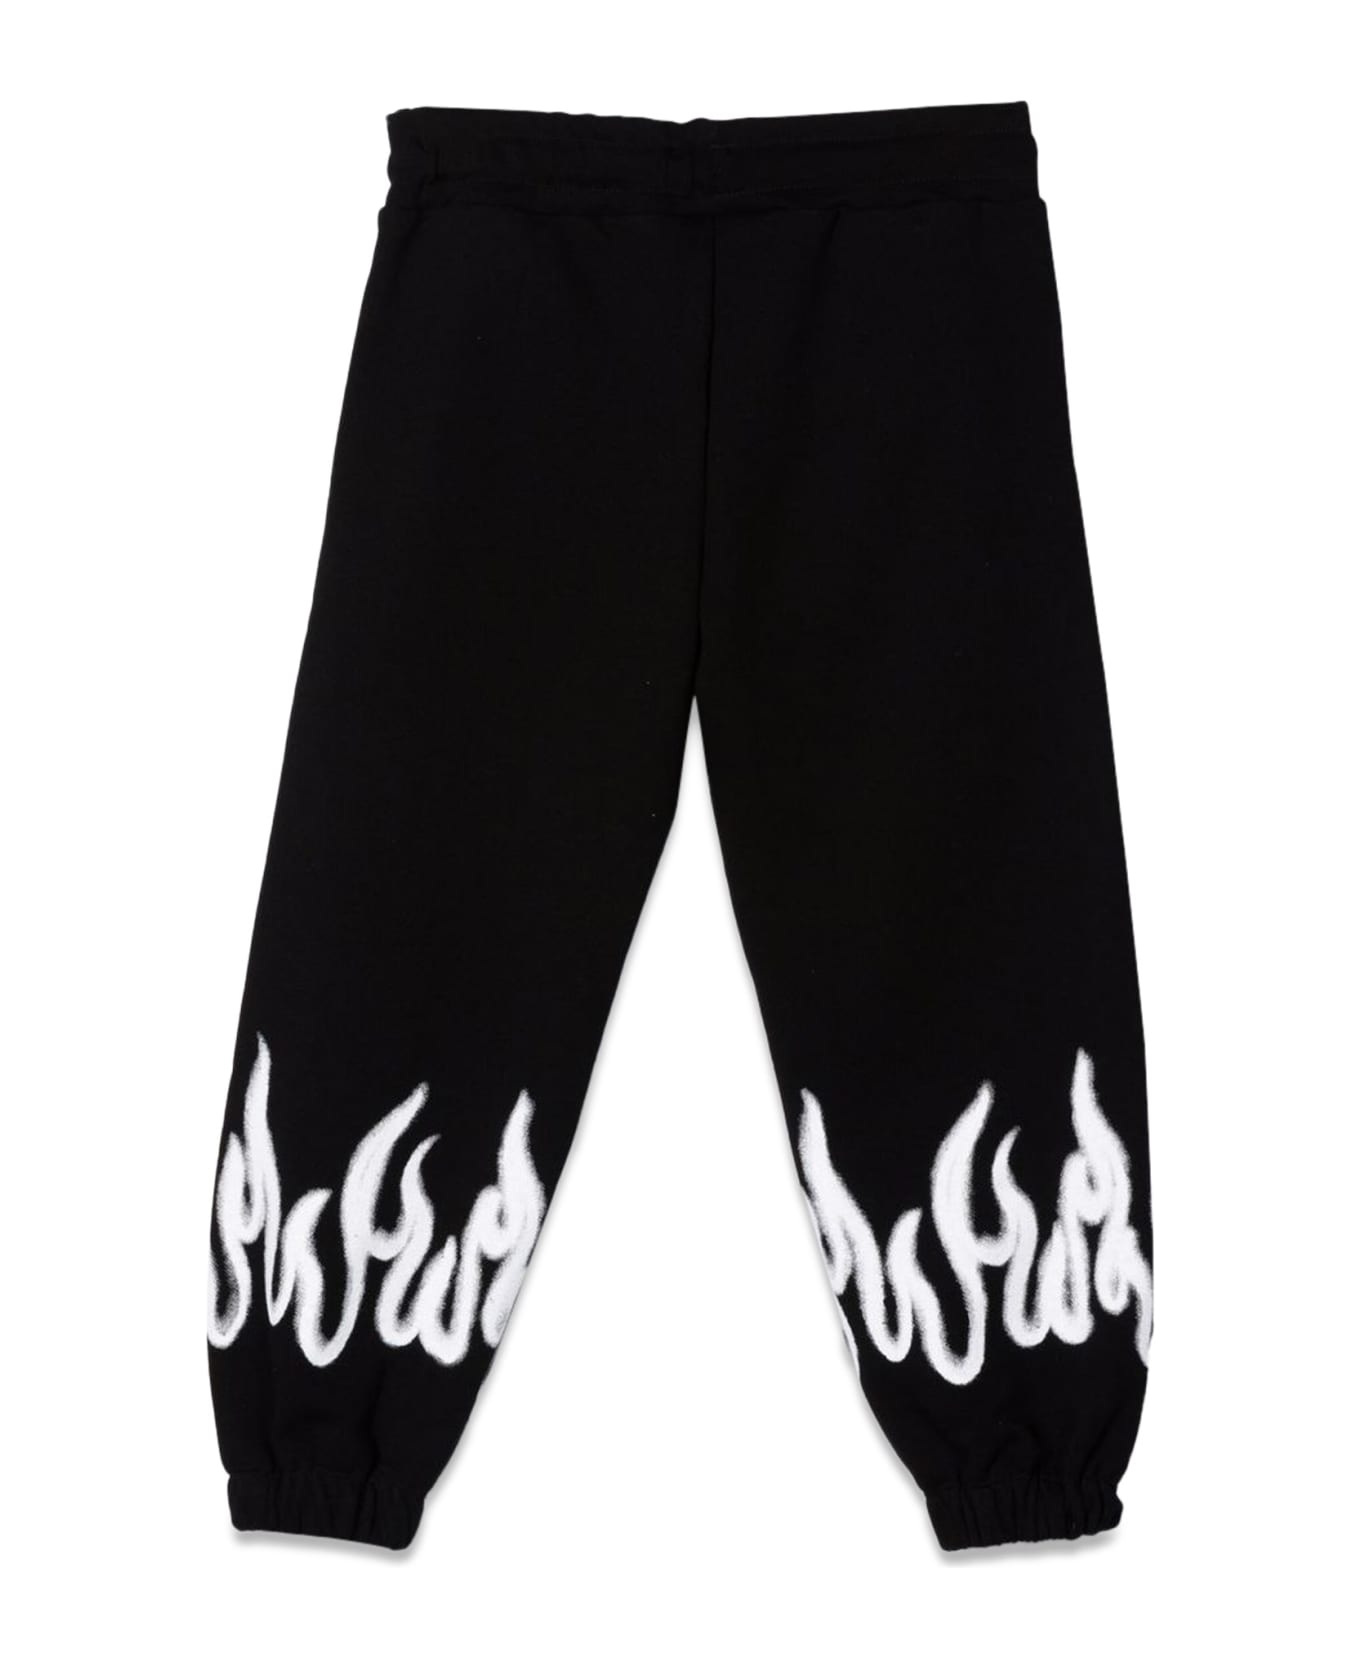 Vision of Super Black Pants Kids With White Spray Flames - NERO